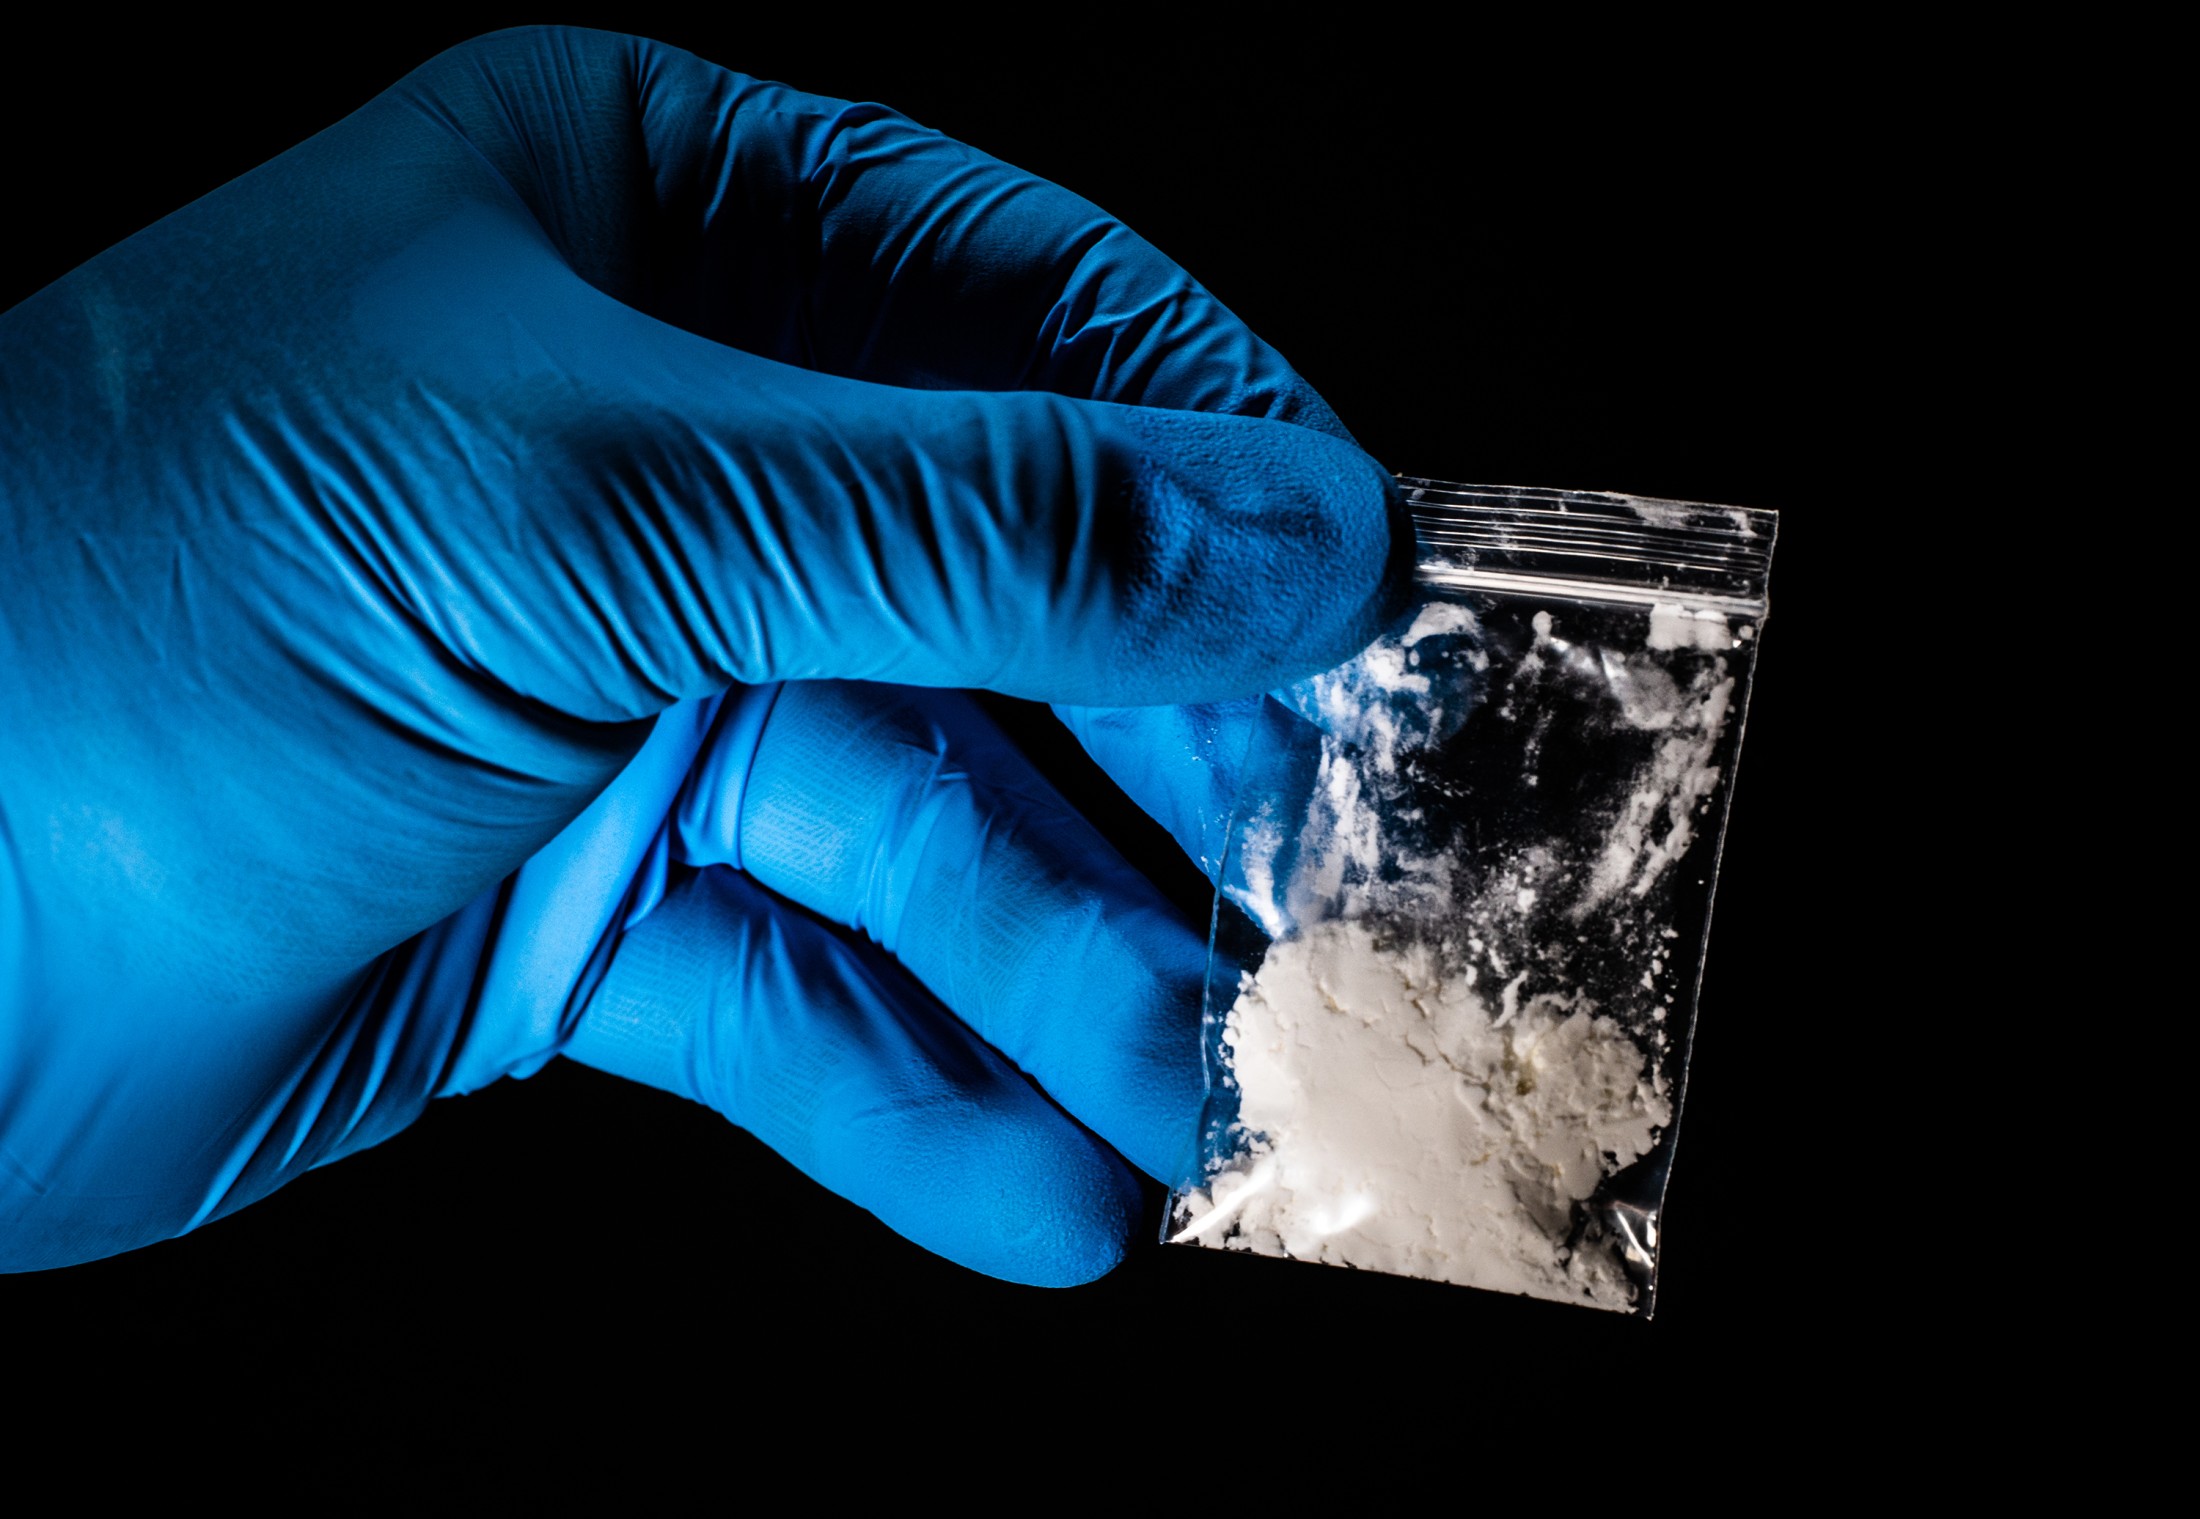 Washington grasps at solutions for America’s fentanyl crisis